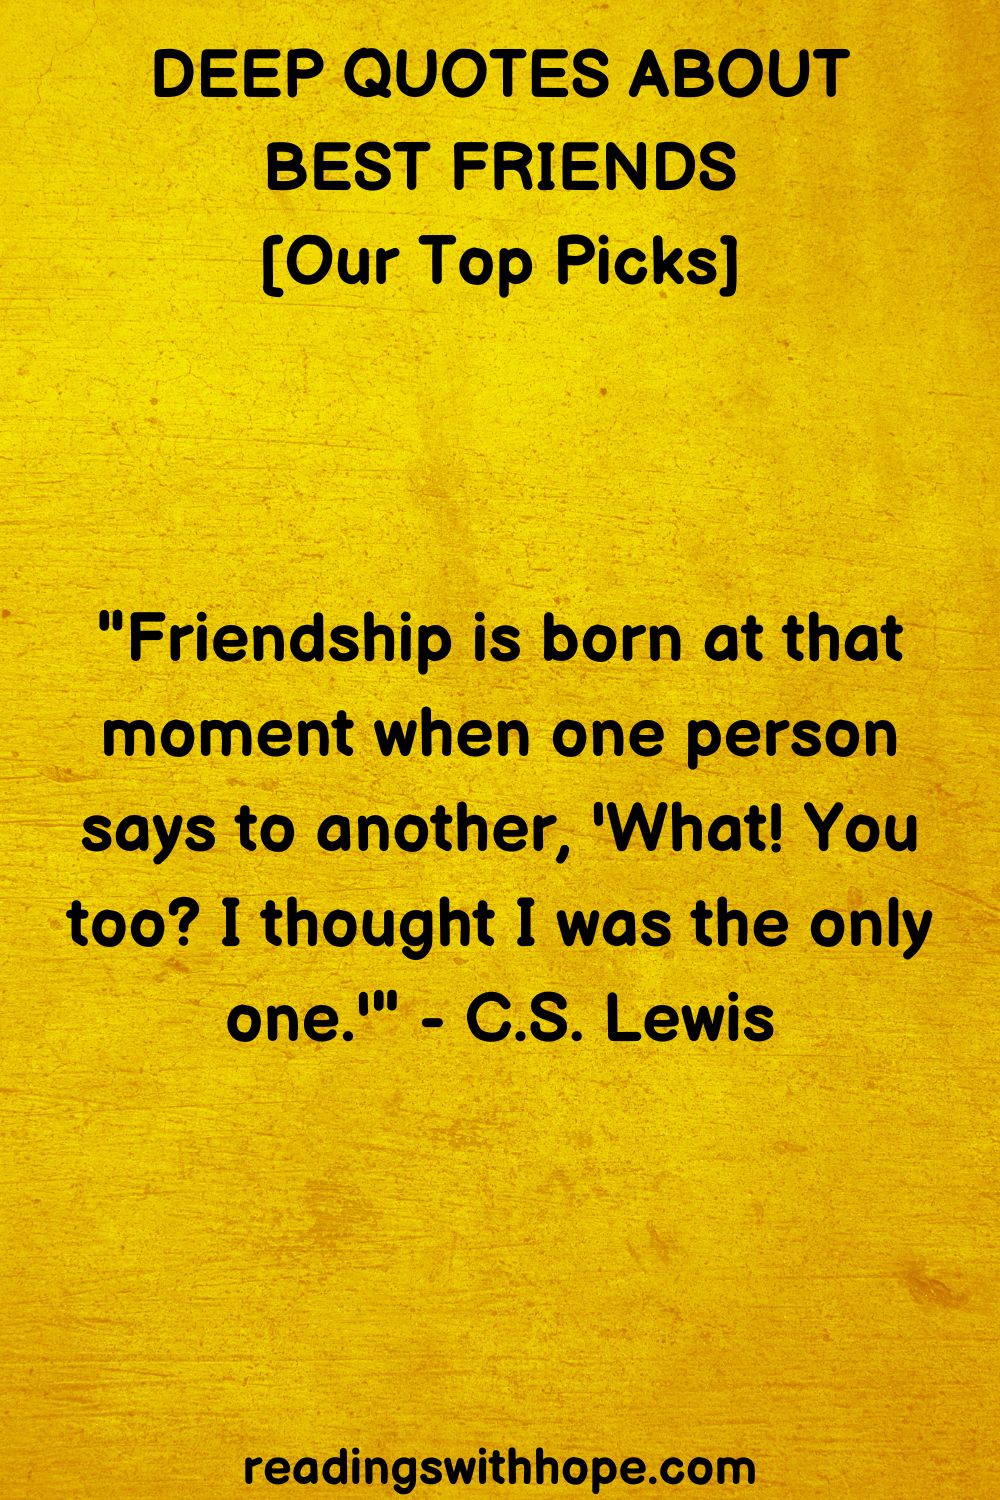 deep quotes about best friends